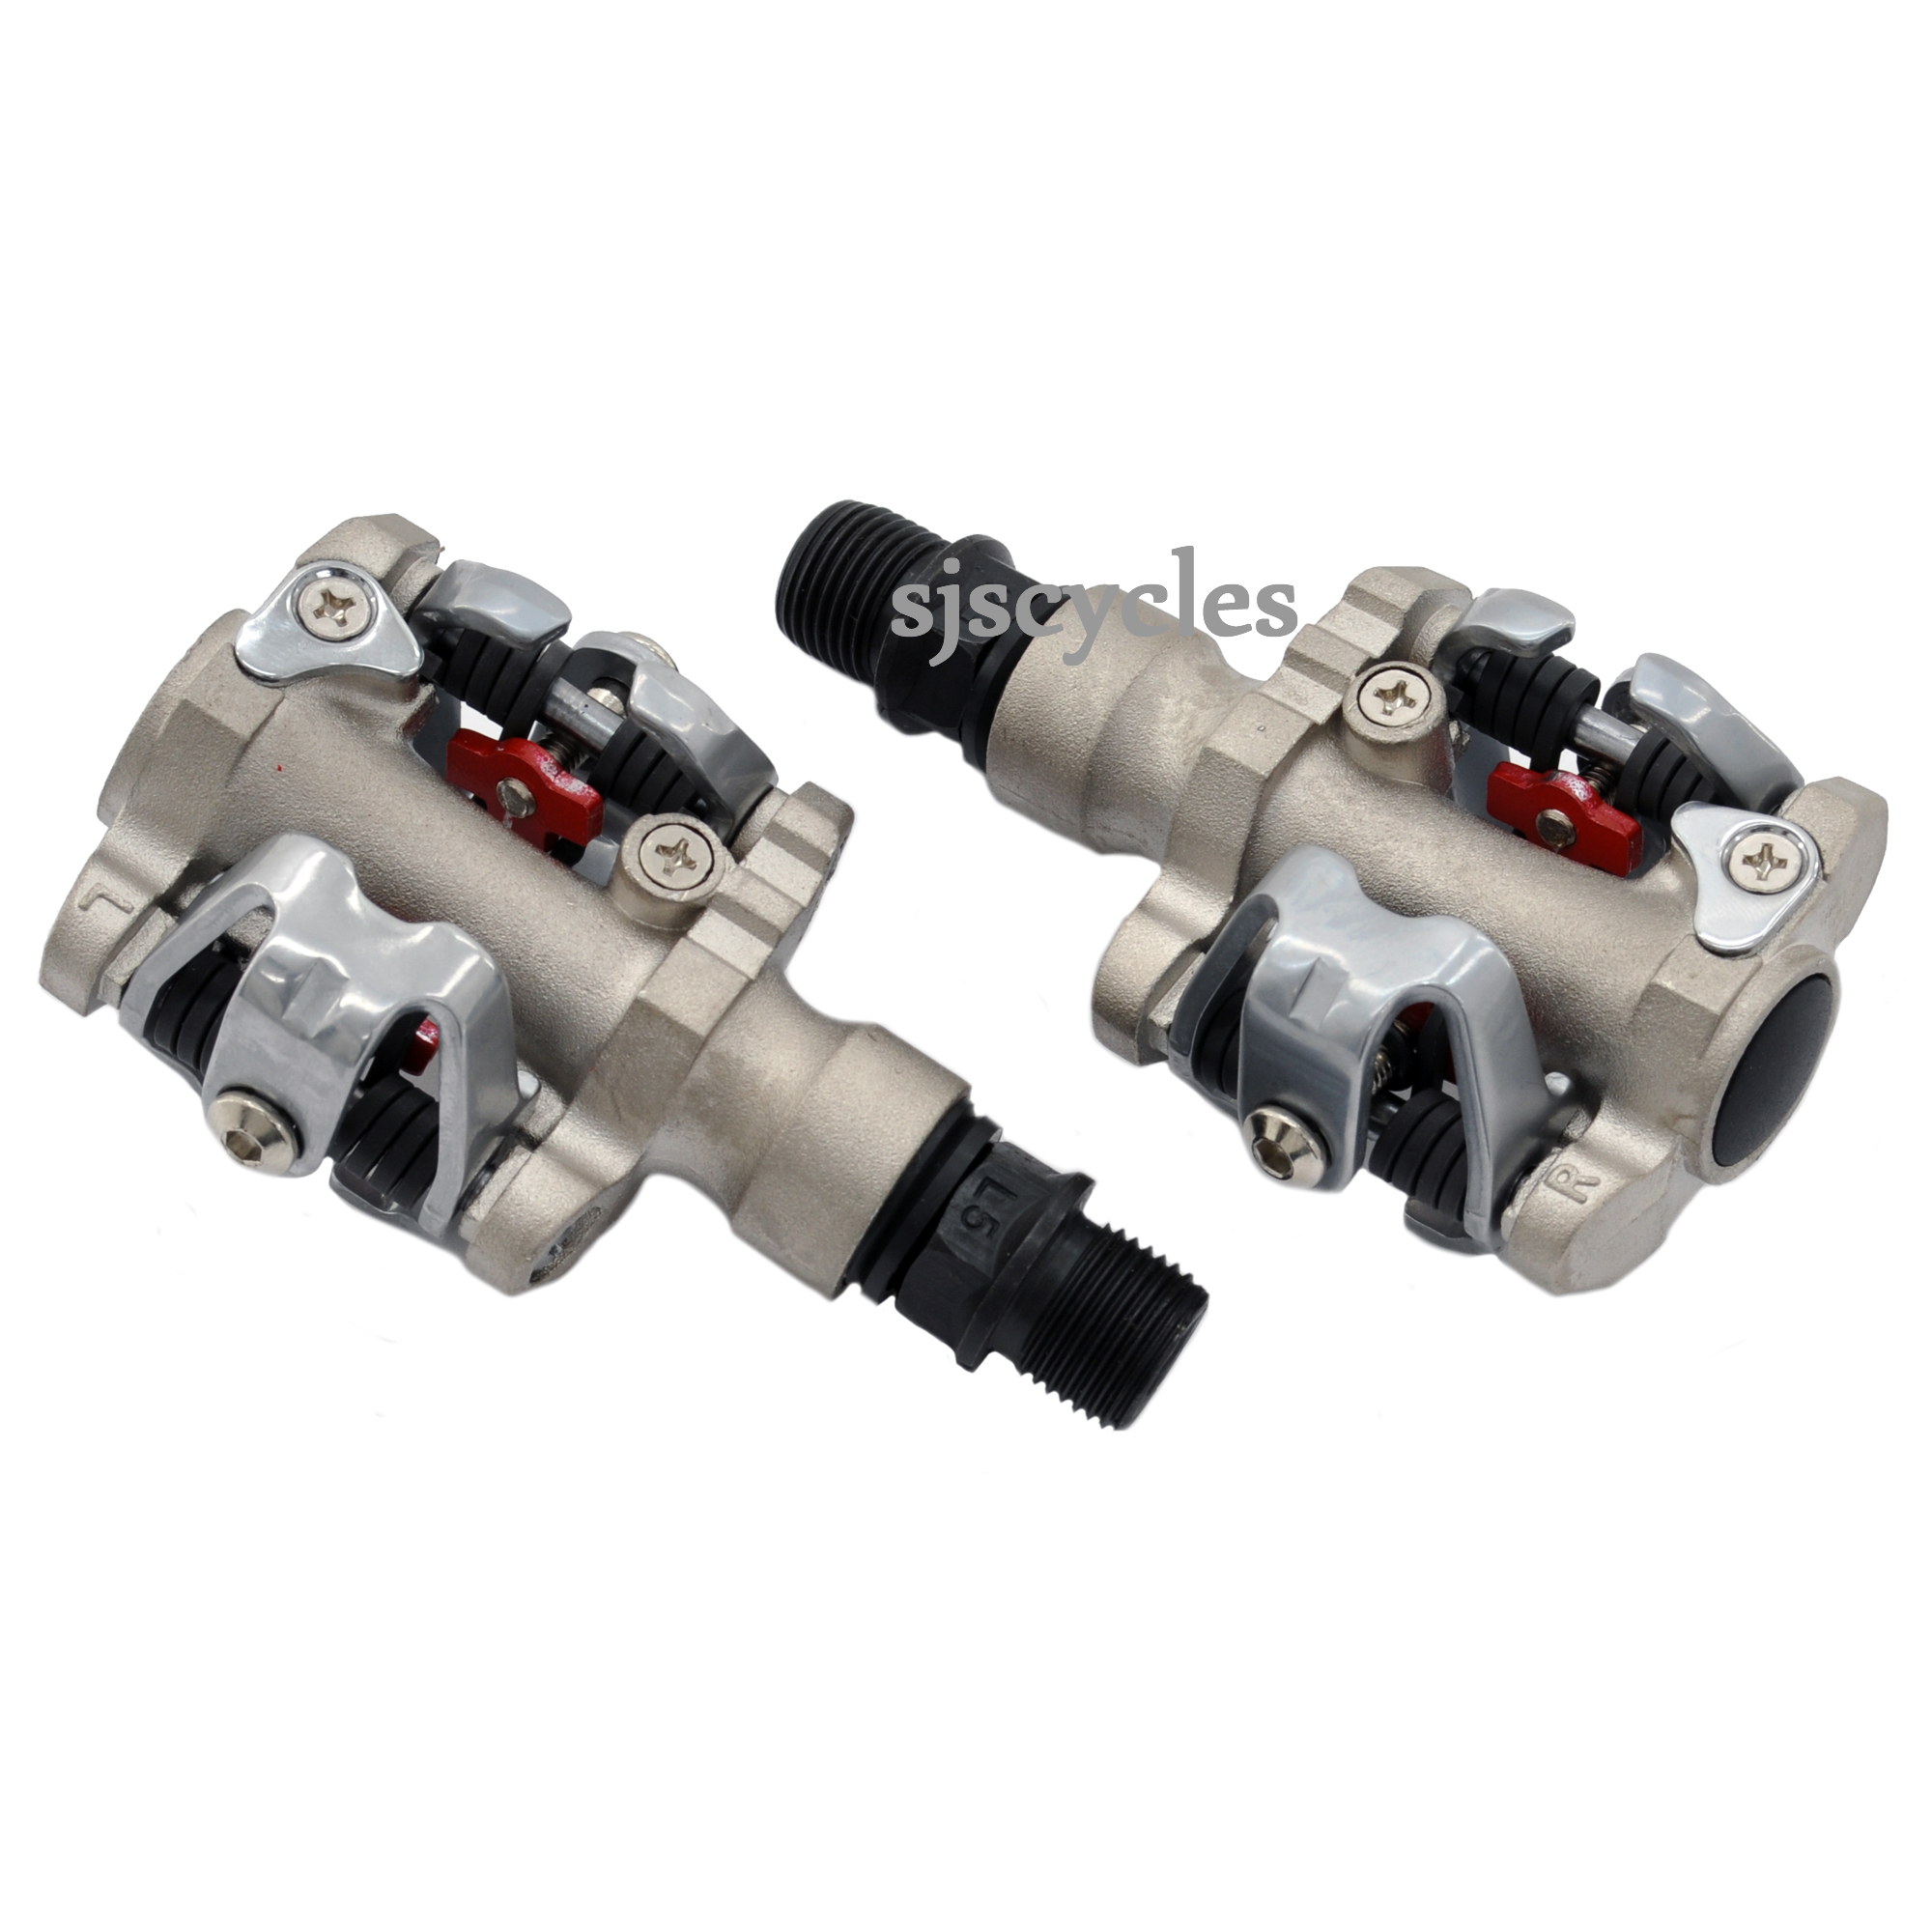 spd pedals with flat side